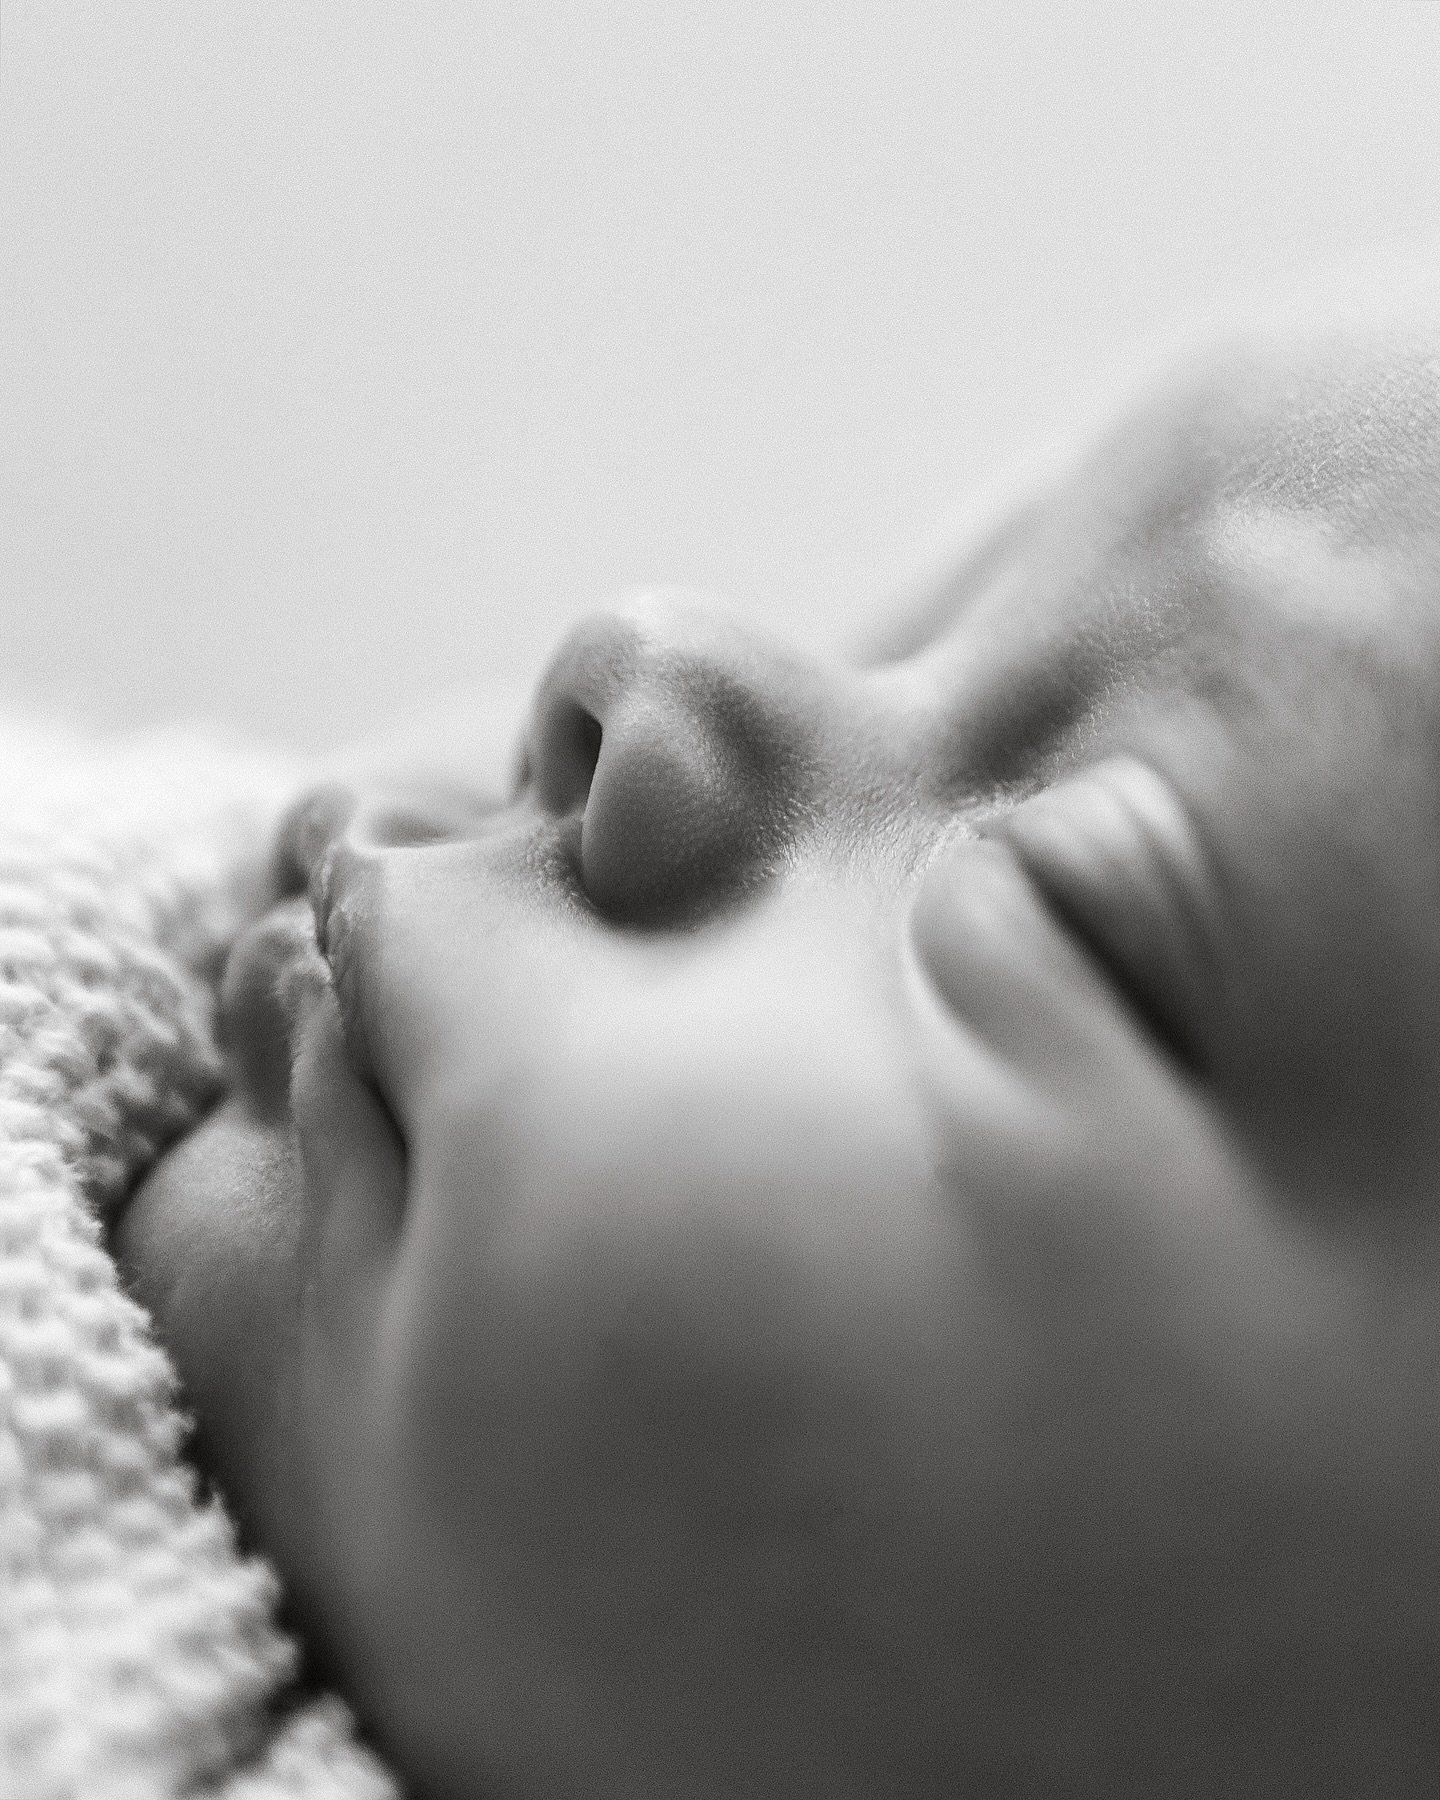 That little pout 😚

These beautiful profile shots are soon becoming one of my faves on any newborn session ❤️